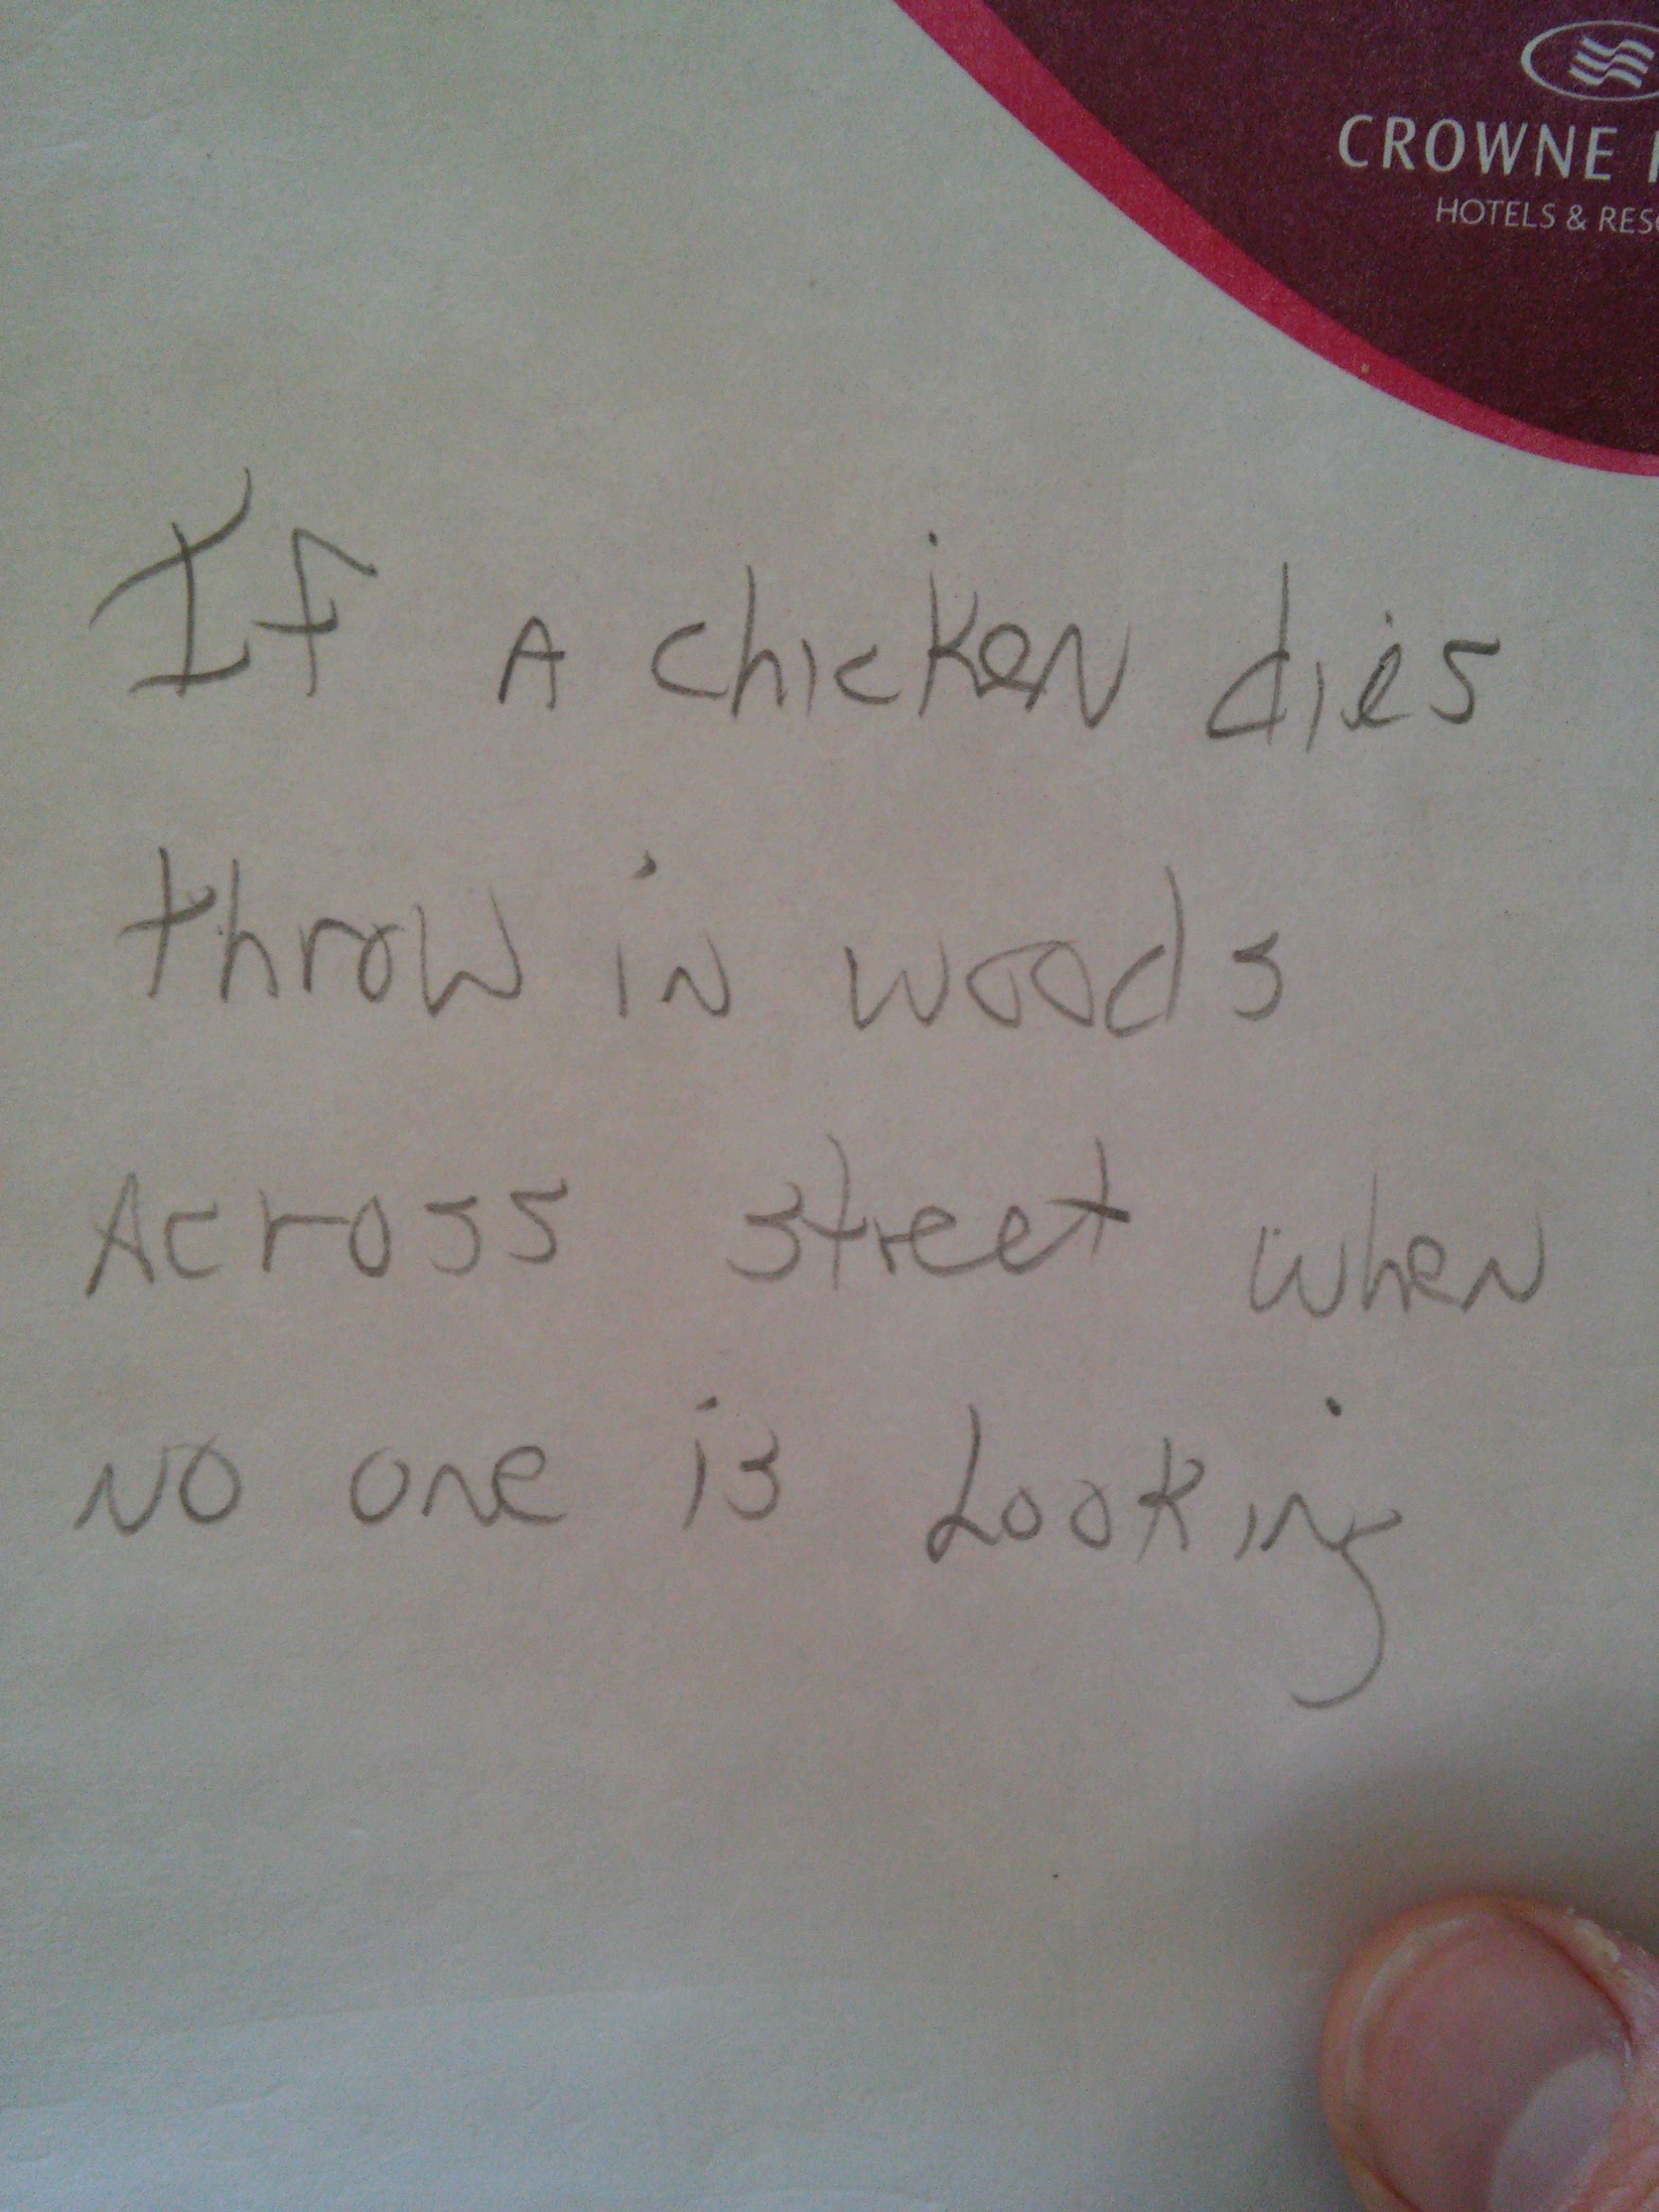 Watching my parents farm for the weekend... Note from my mom.